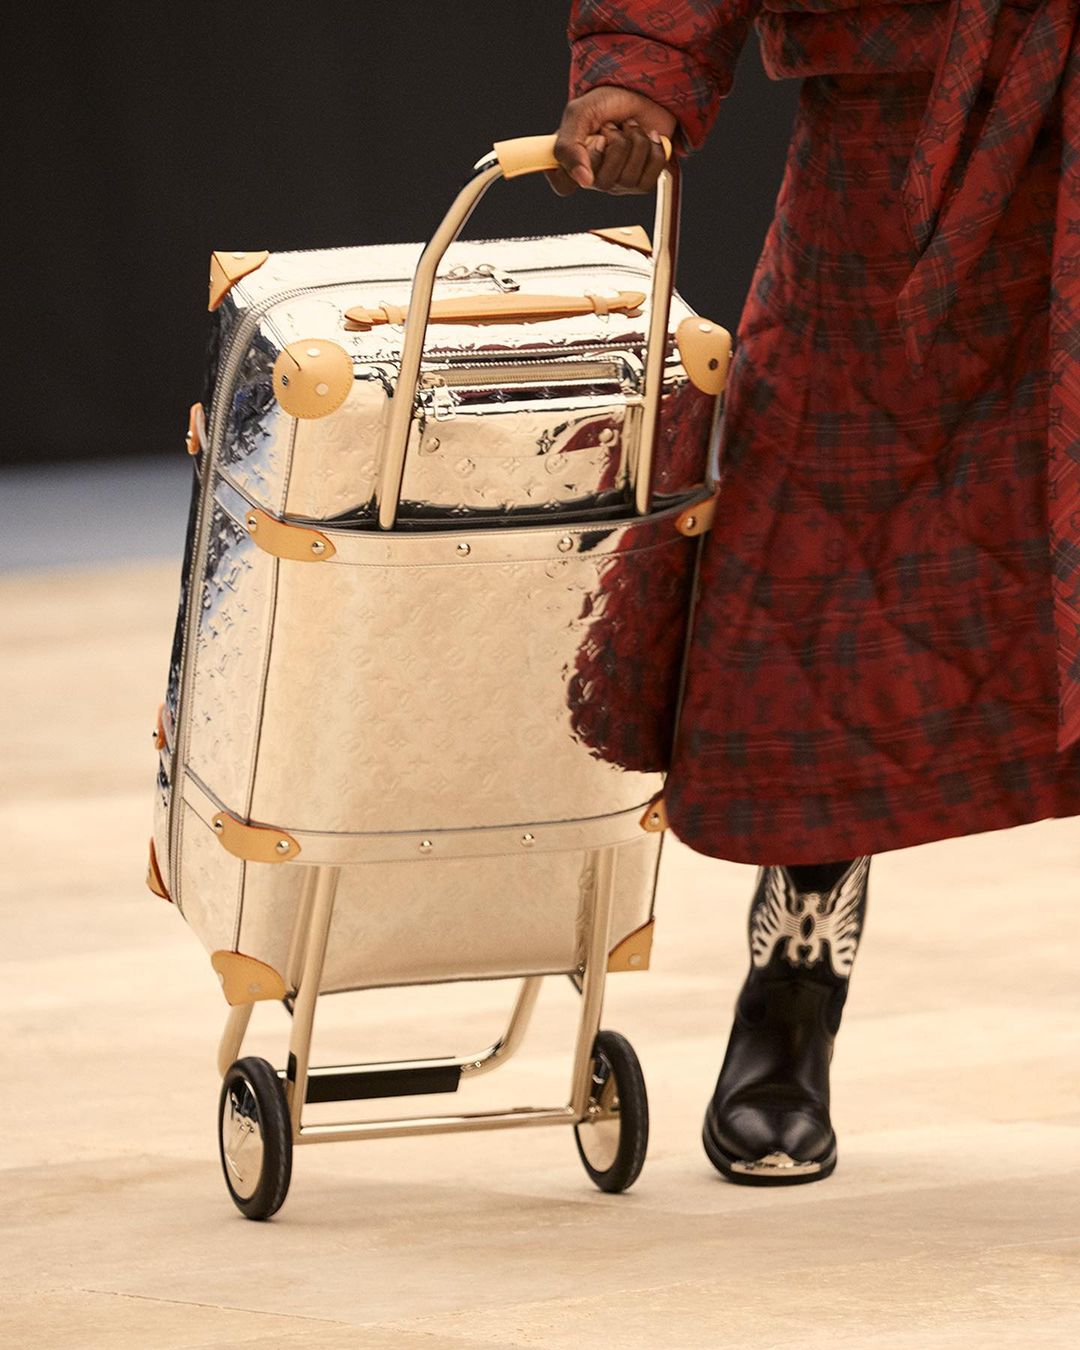 Louis Vuitton on X: #LVMenSS21 Amplified forms. A selection of